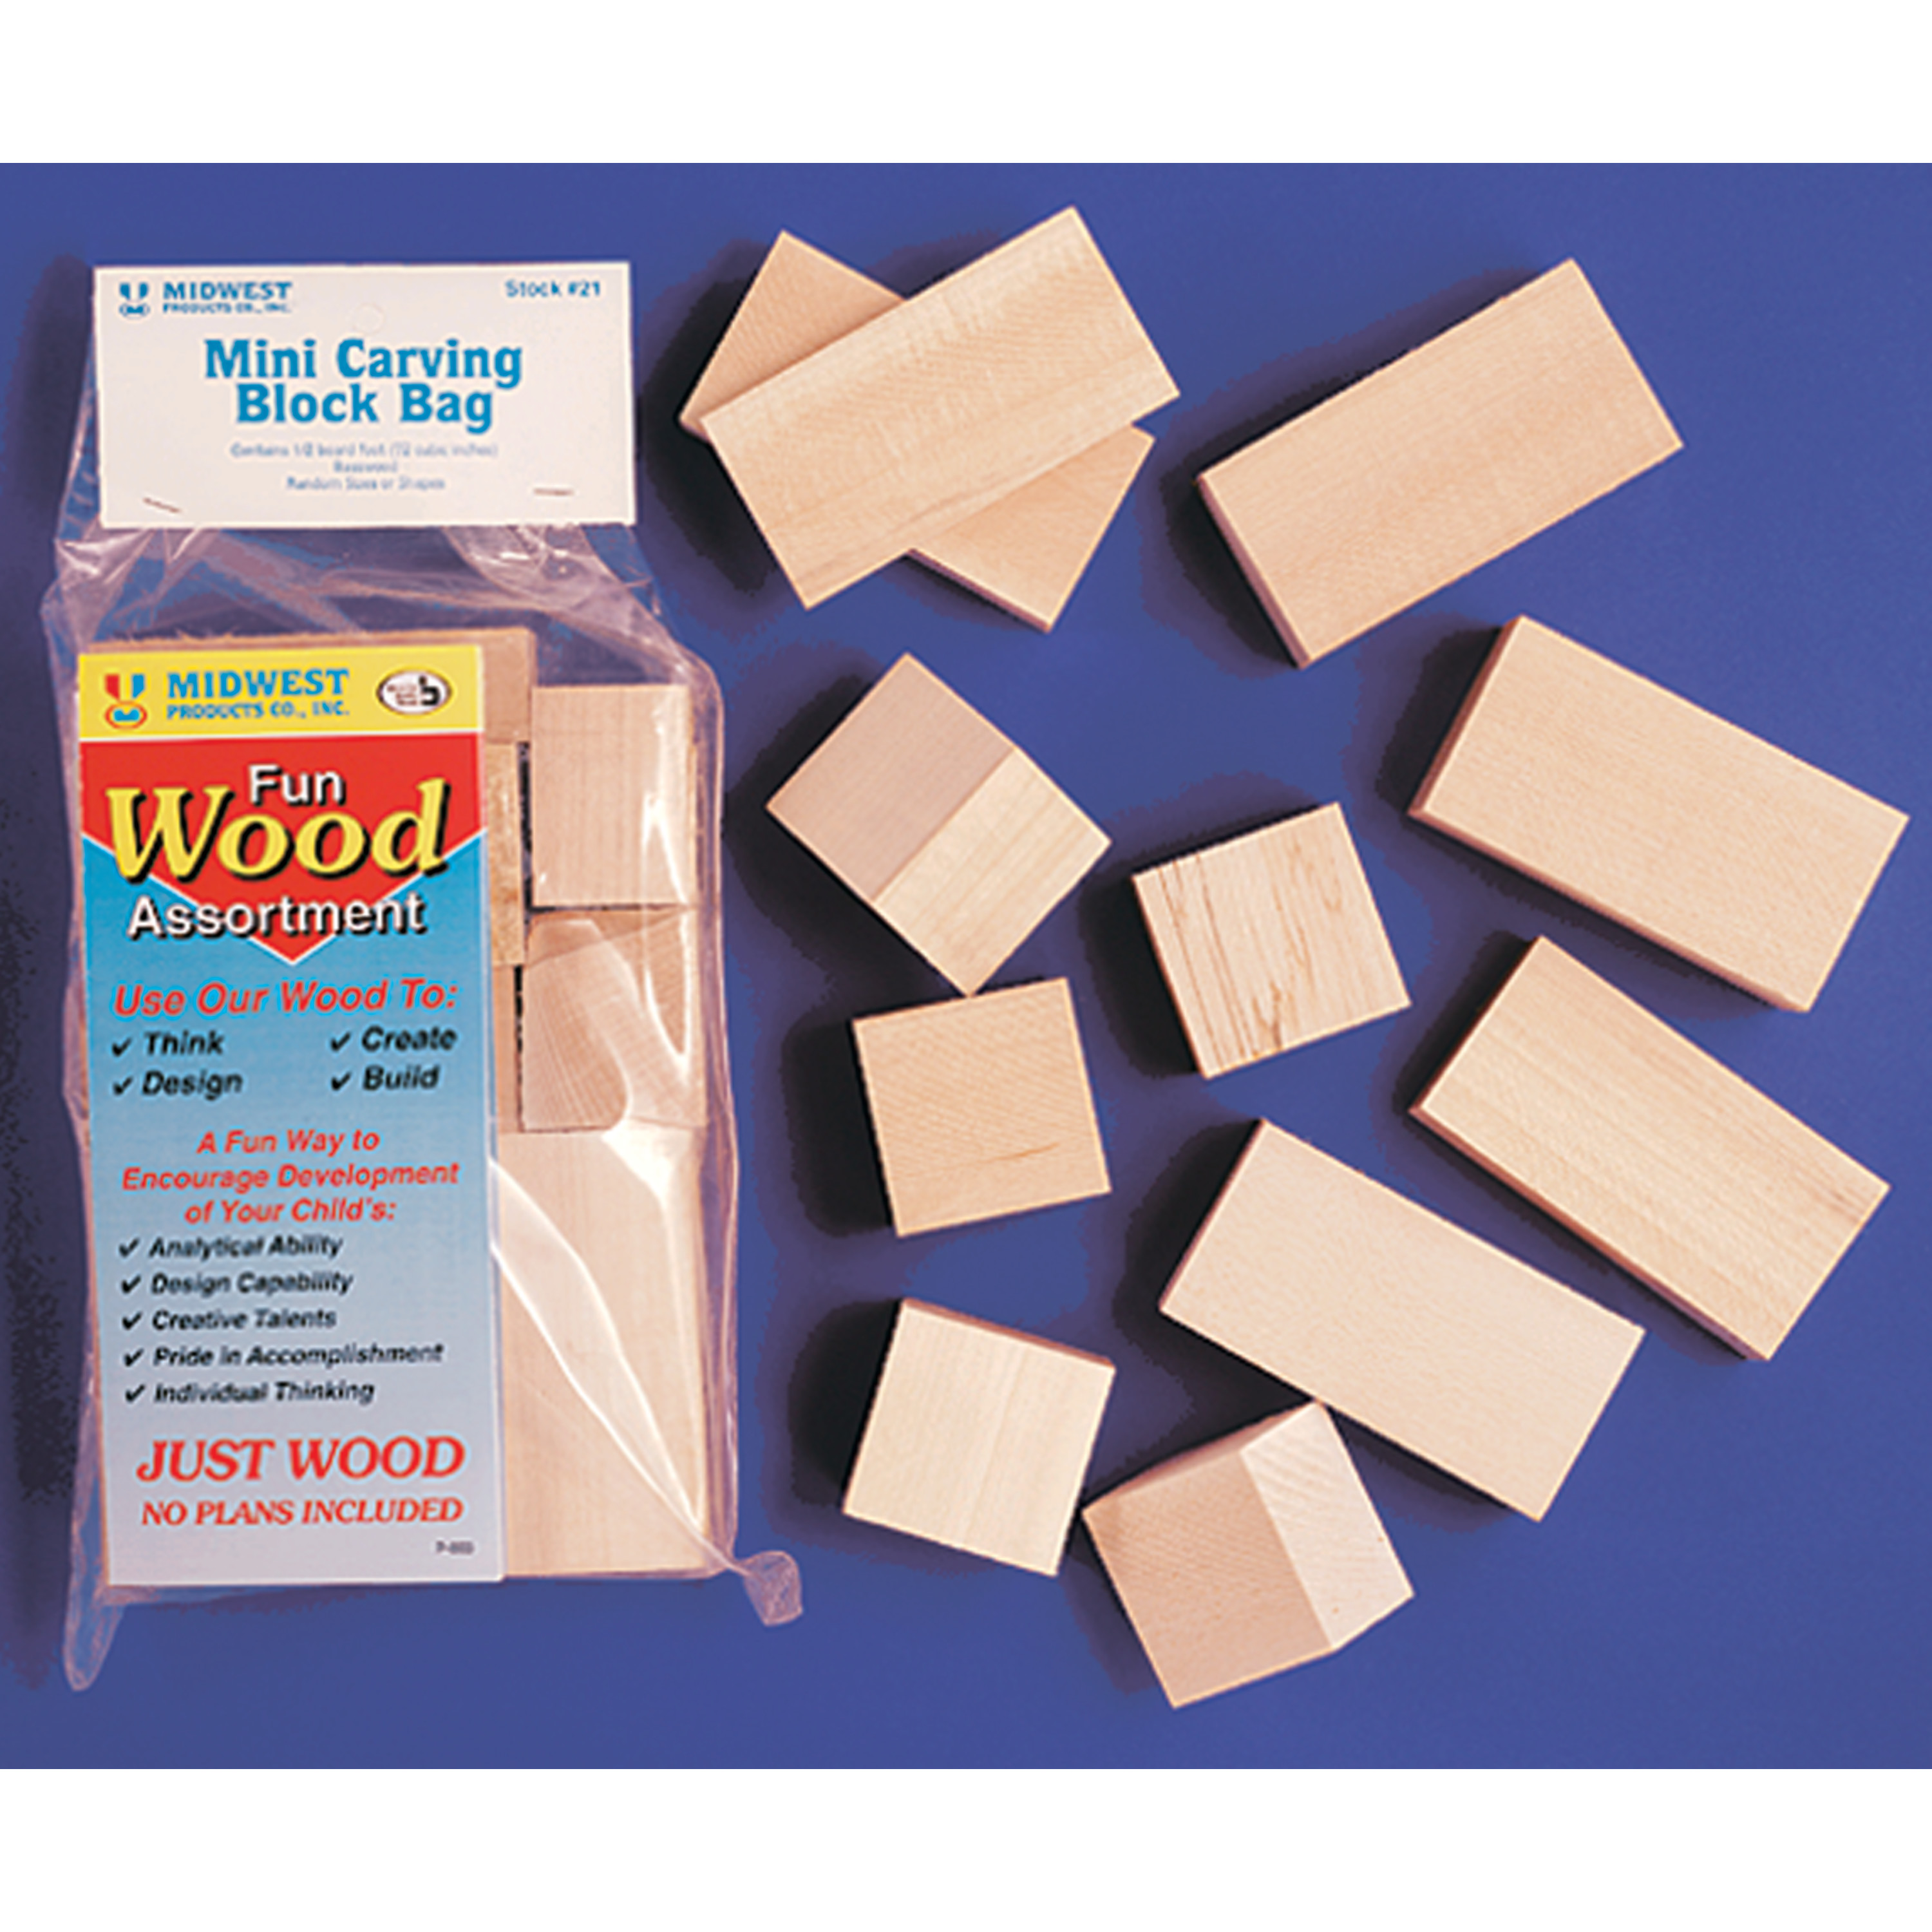 Midwest Just Wood Basswood Mini Carving Block Bag - image 1 of 2